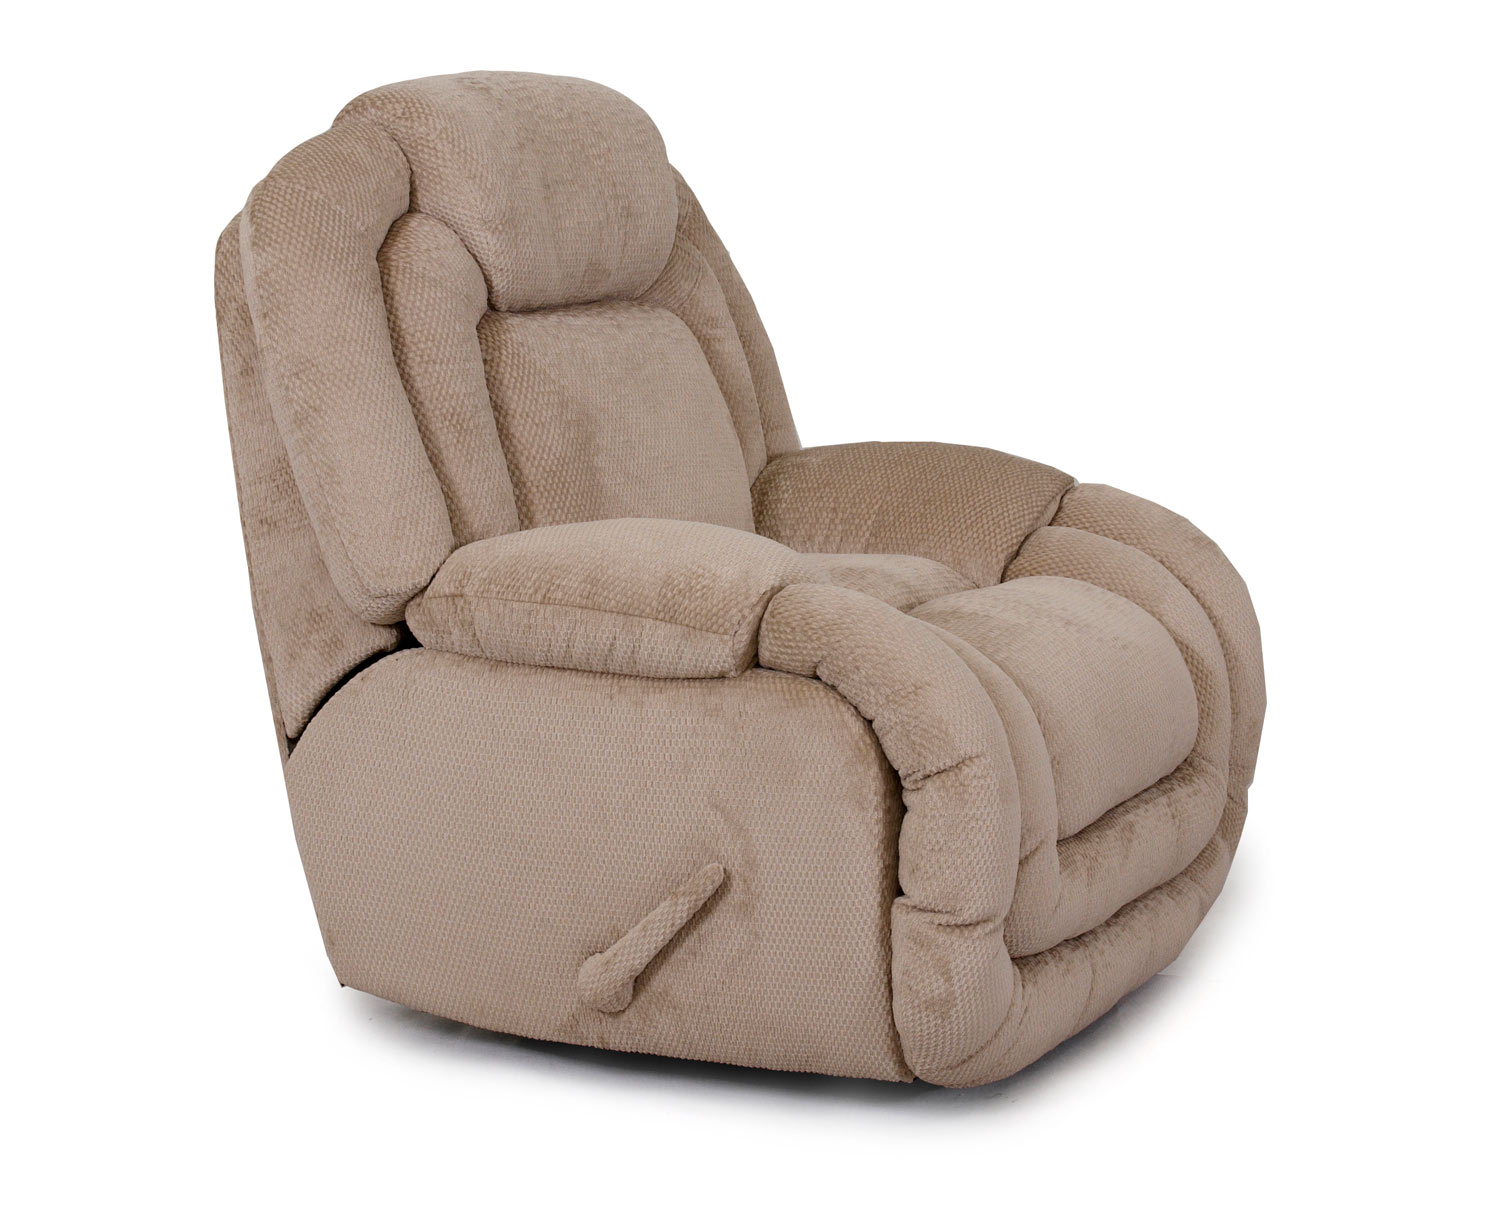 Barcalounger Apex II Casual Comforts Recliner Chair - Dallas Mink